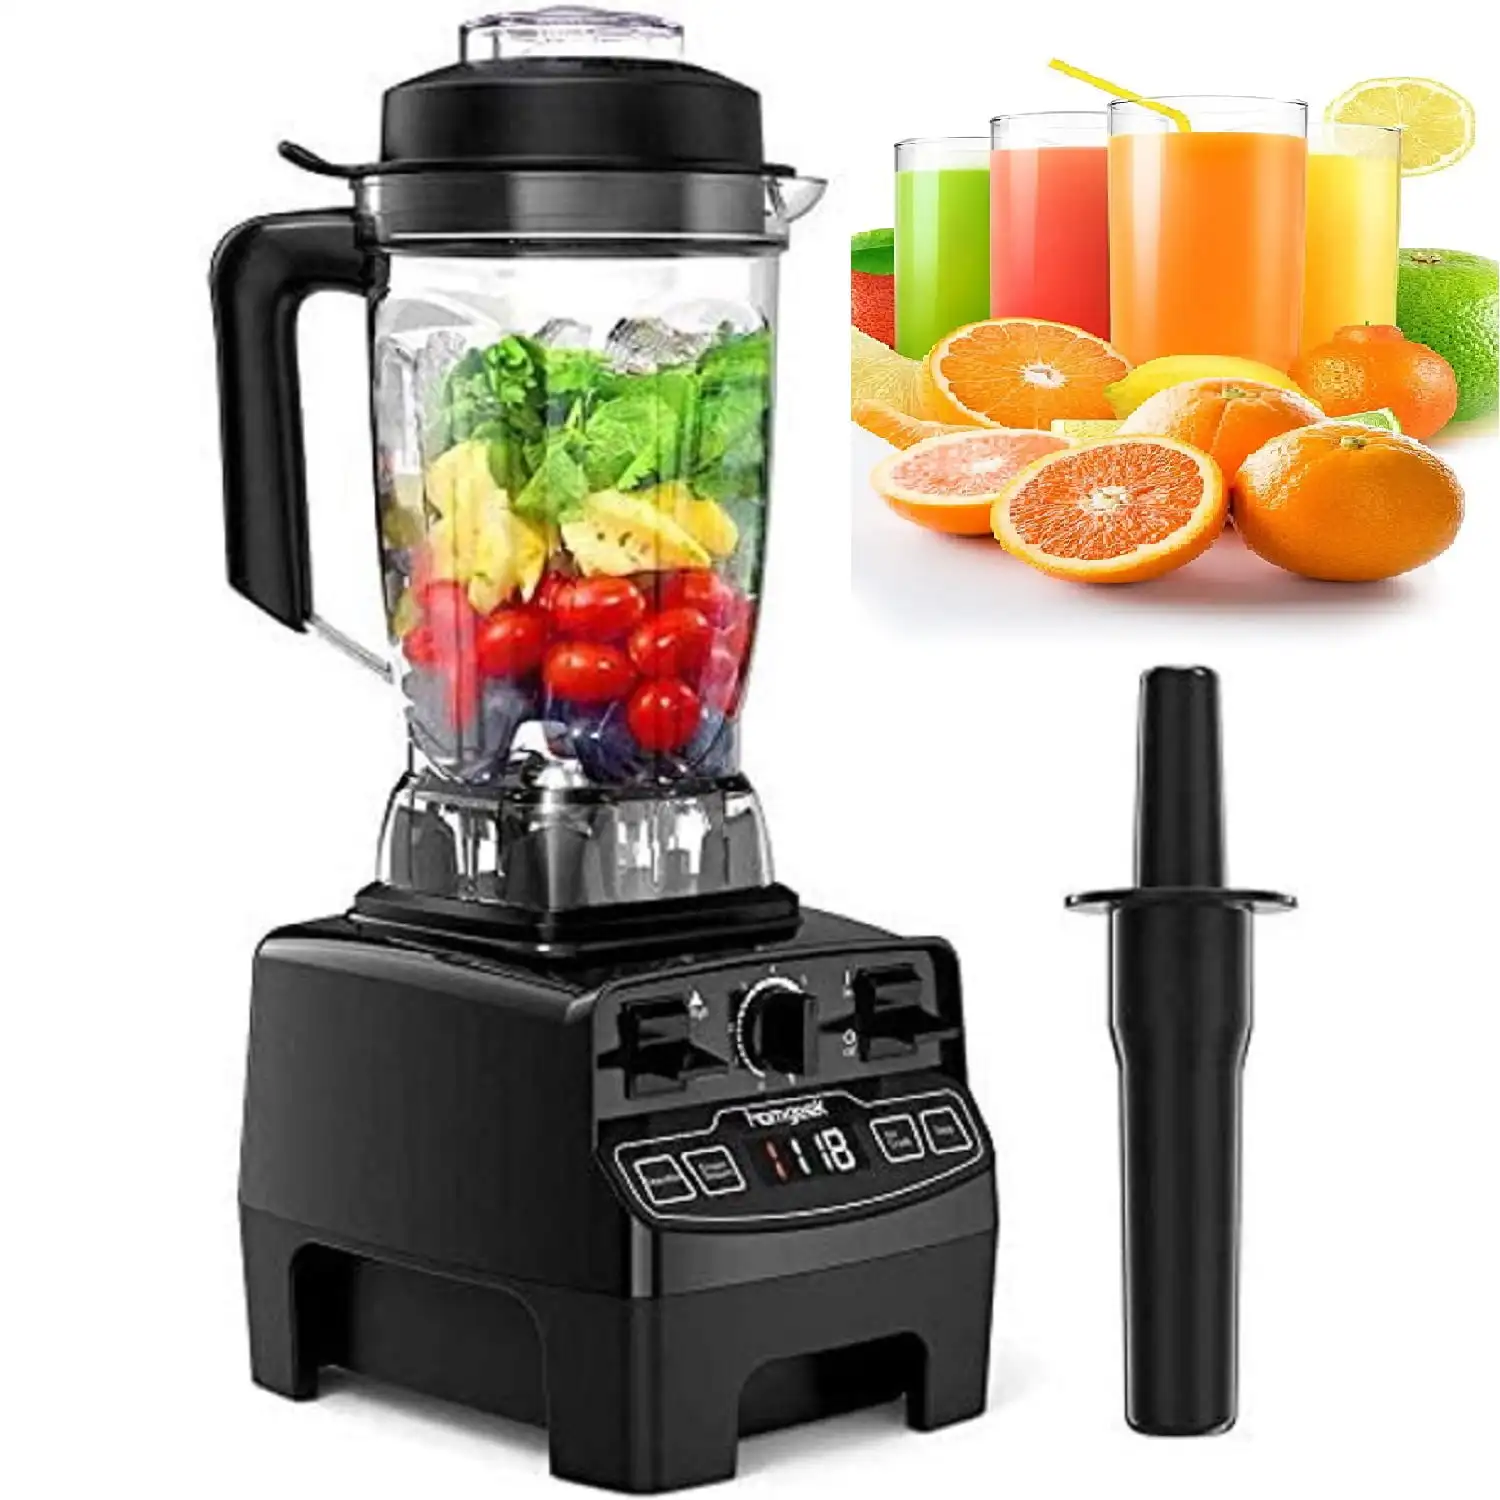 

Professional Blender with 1450-Watt Motor & 68 oz Dishwasher-Safe Total Crushing Pitcher for Smoothies, Shakes & Frozen Drinks,